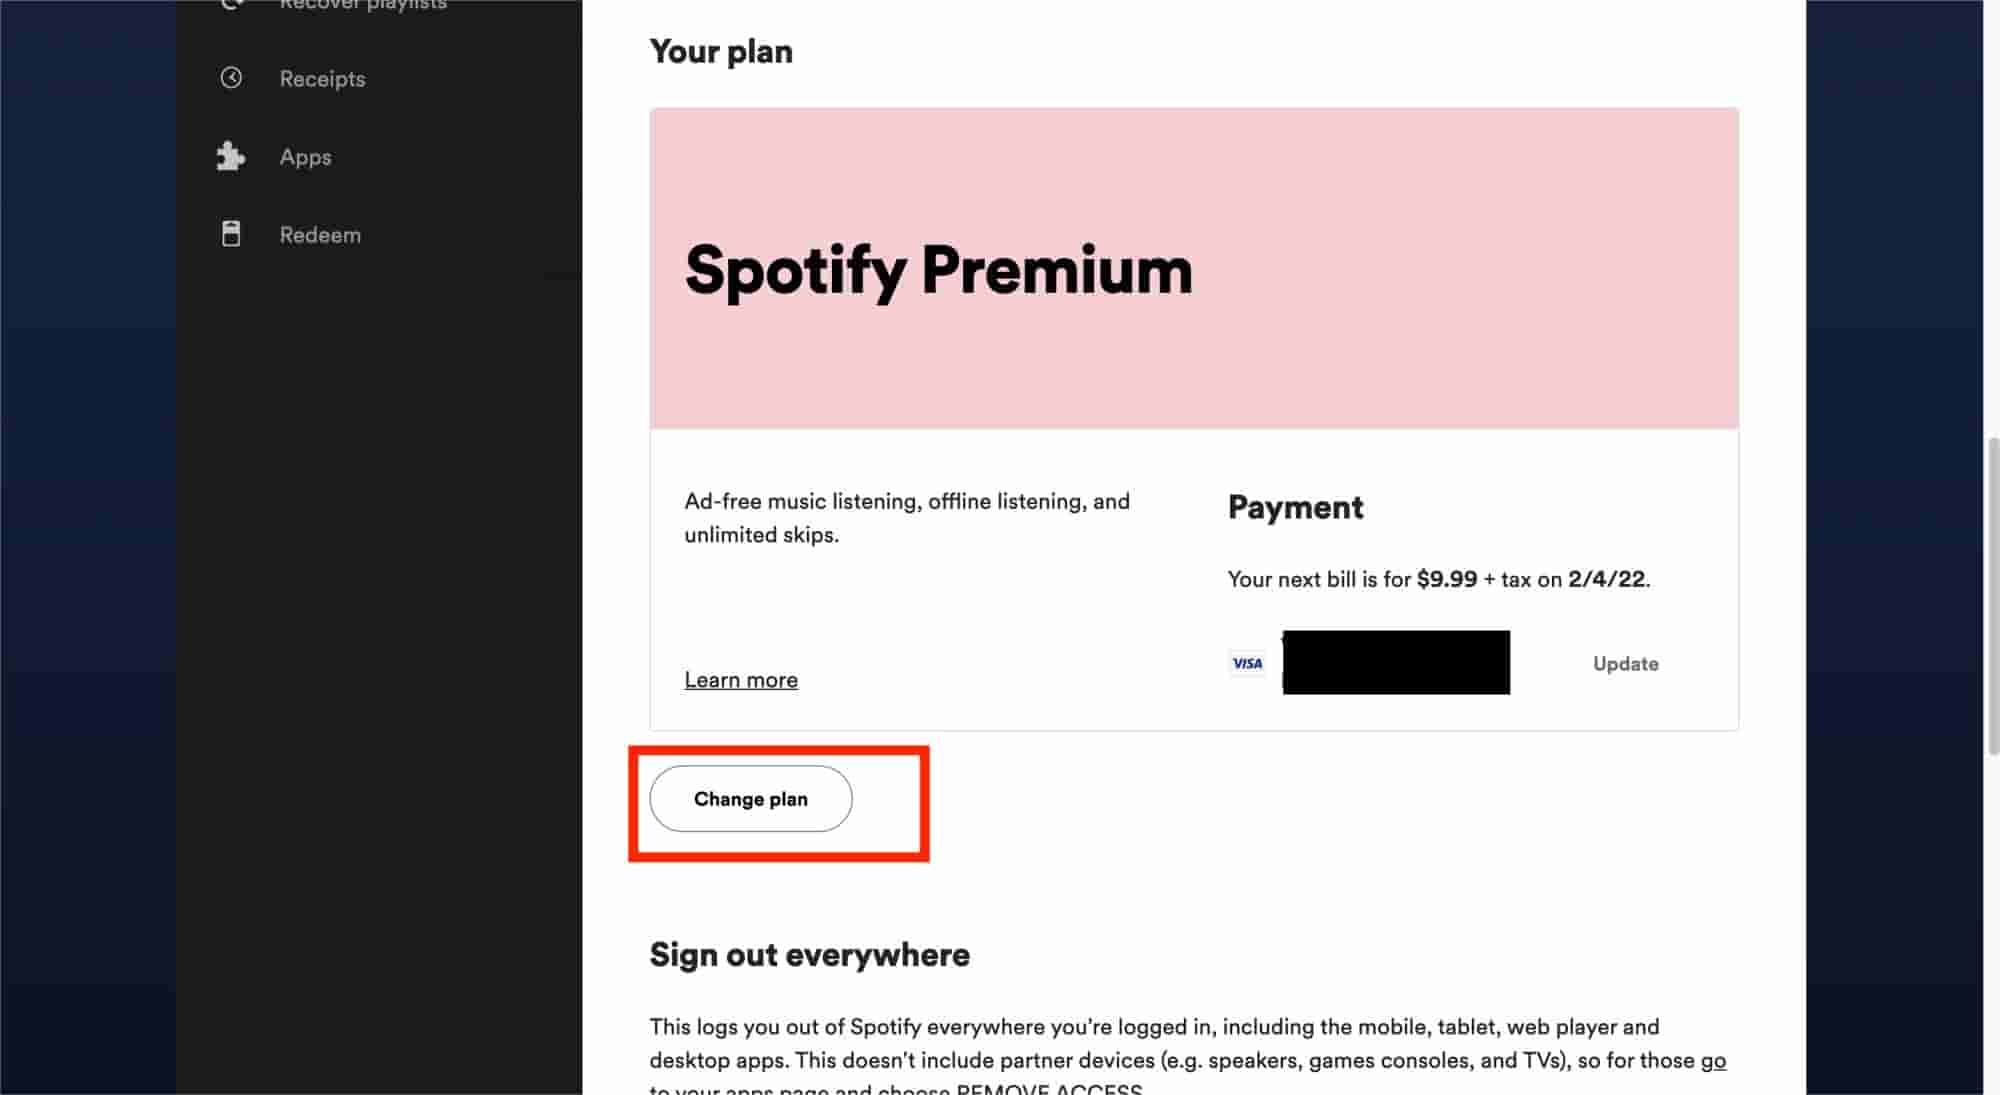 How To Change Your Spotify Plan